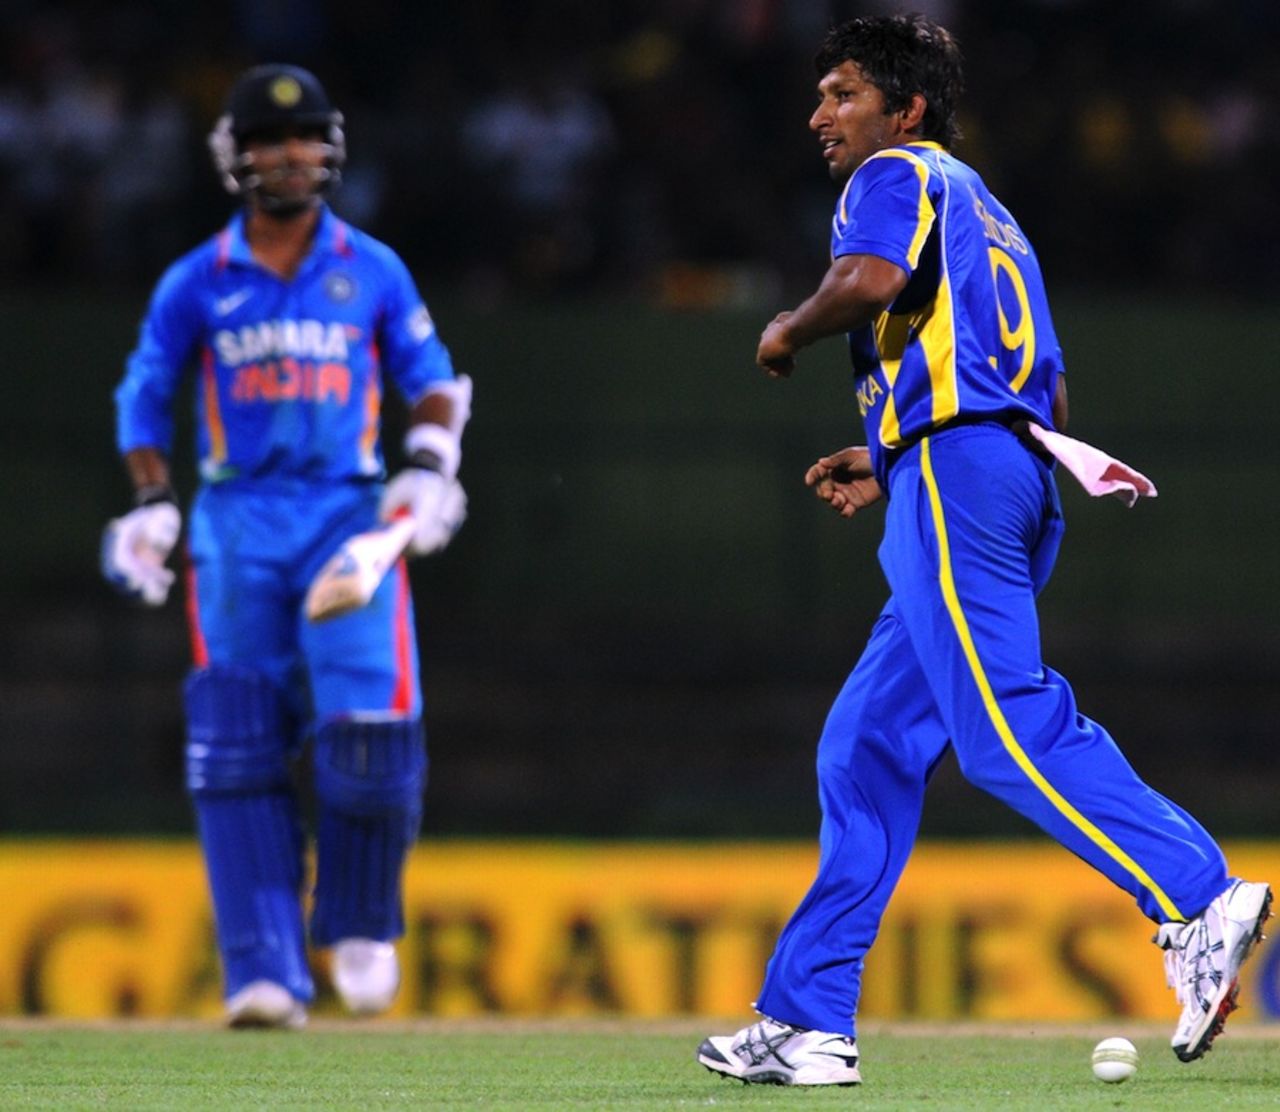 Jeevan Mendis completes a catch off his own bowling, Sri Lanka v India, Only T20I, Pallekele, August 7, 2012